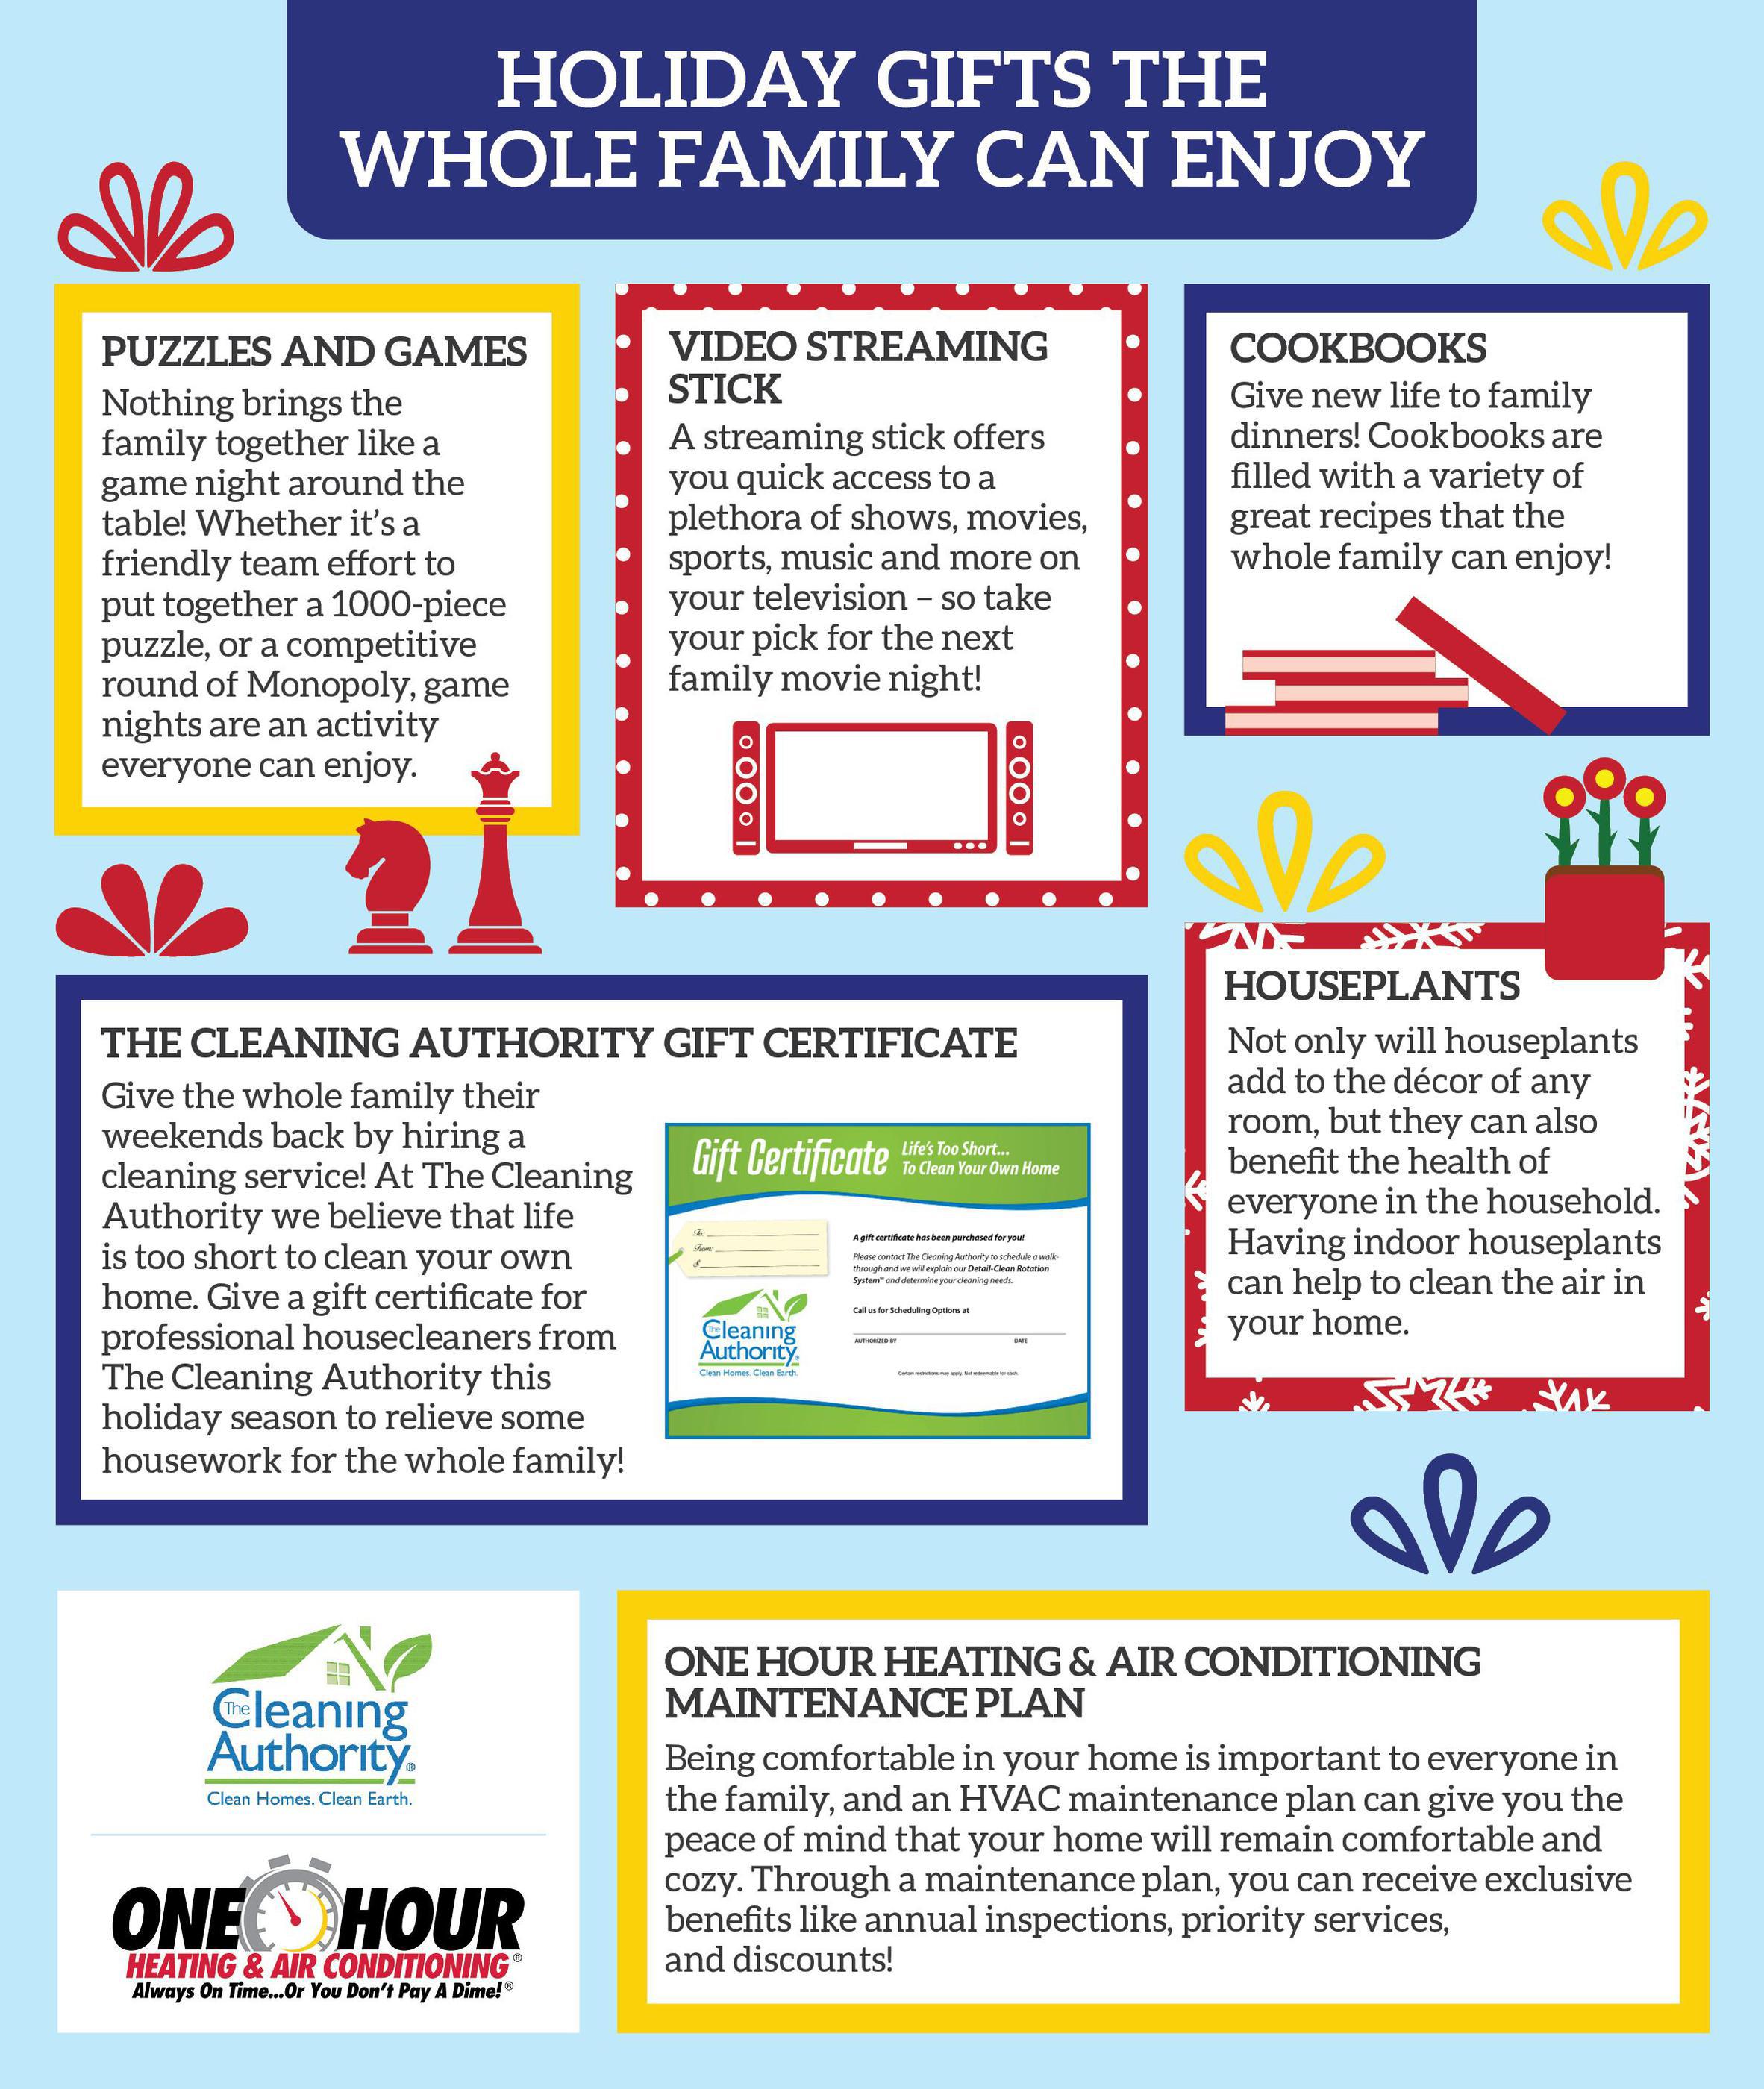 TCA-OHH Holiday Gifts For Whole Family Blog Infographic